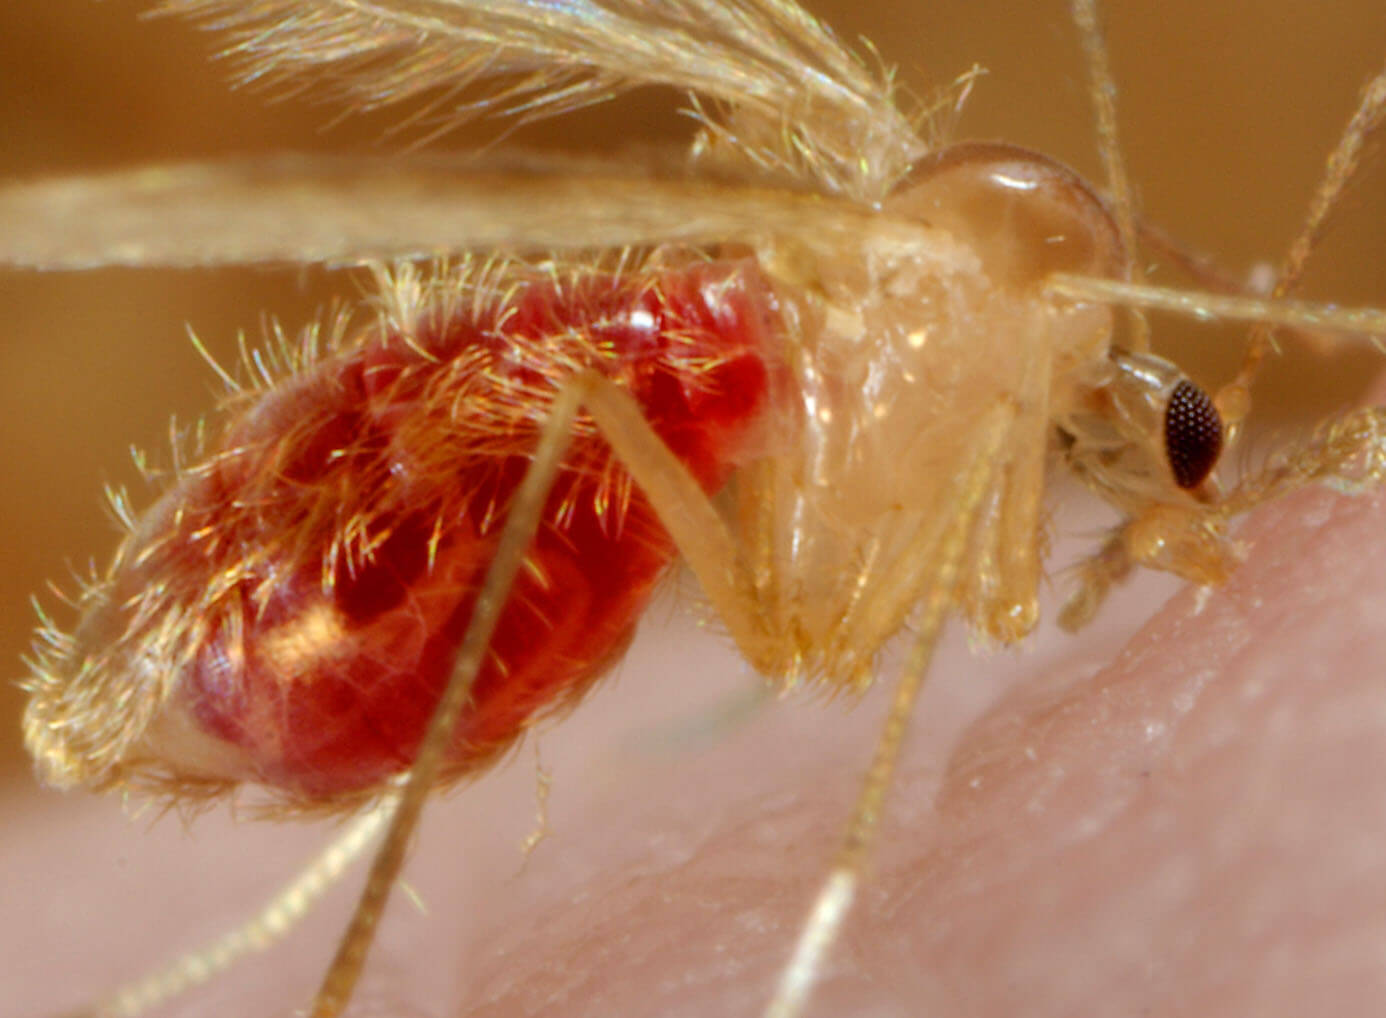 Sand fly on skin up close image